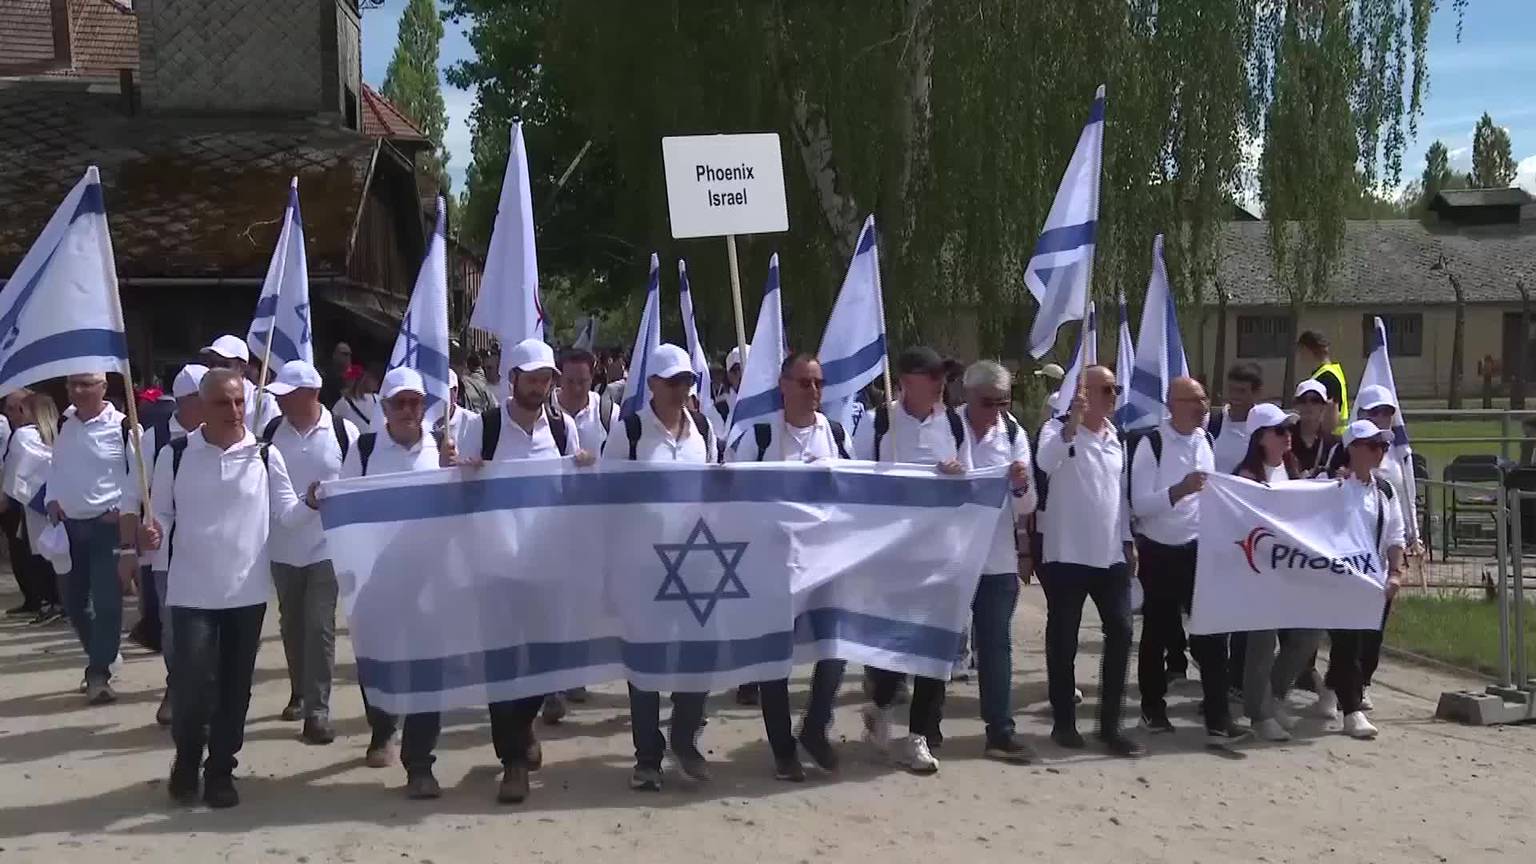 Video: Yearly memorial march at Auschwitz overshadowed by Israel-Hamas war [Video]